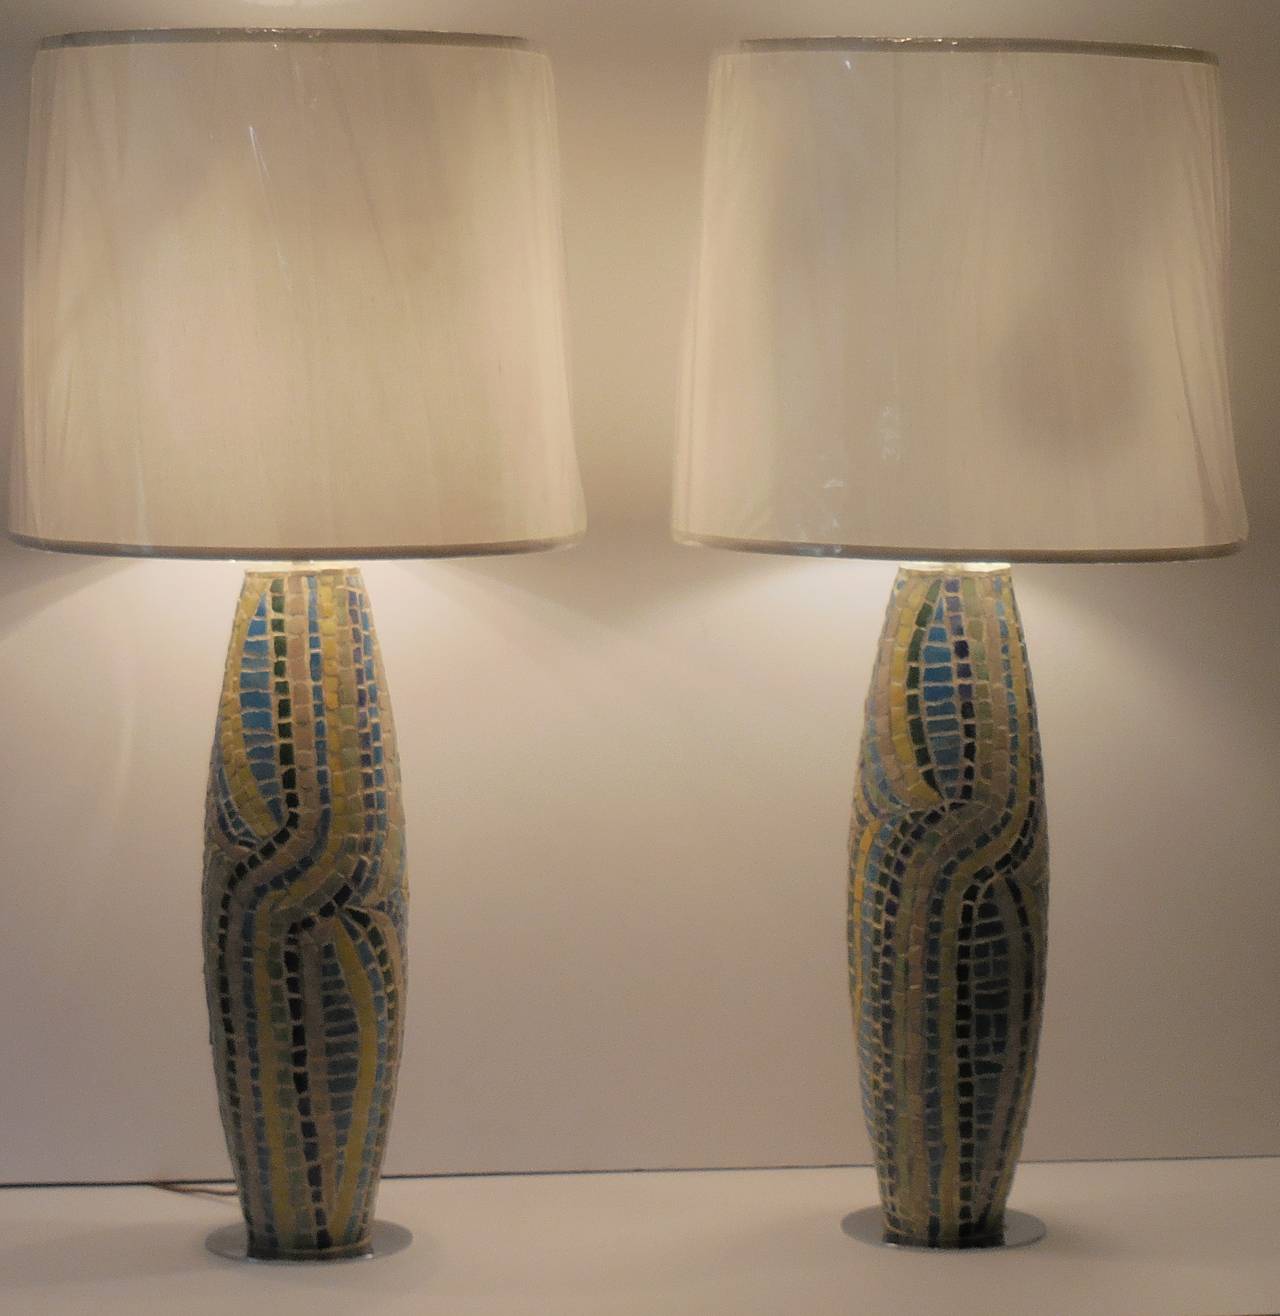 One of a kind table lamps made of wooden body of the lamps surrounded, 
all around with qubist design of broken Persian pottery.
Beautiful colors of green, turquoise, cobalt blue, yellow and cream colors.
Special switch on and off is from the